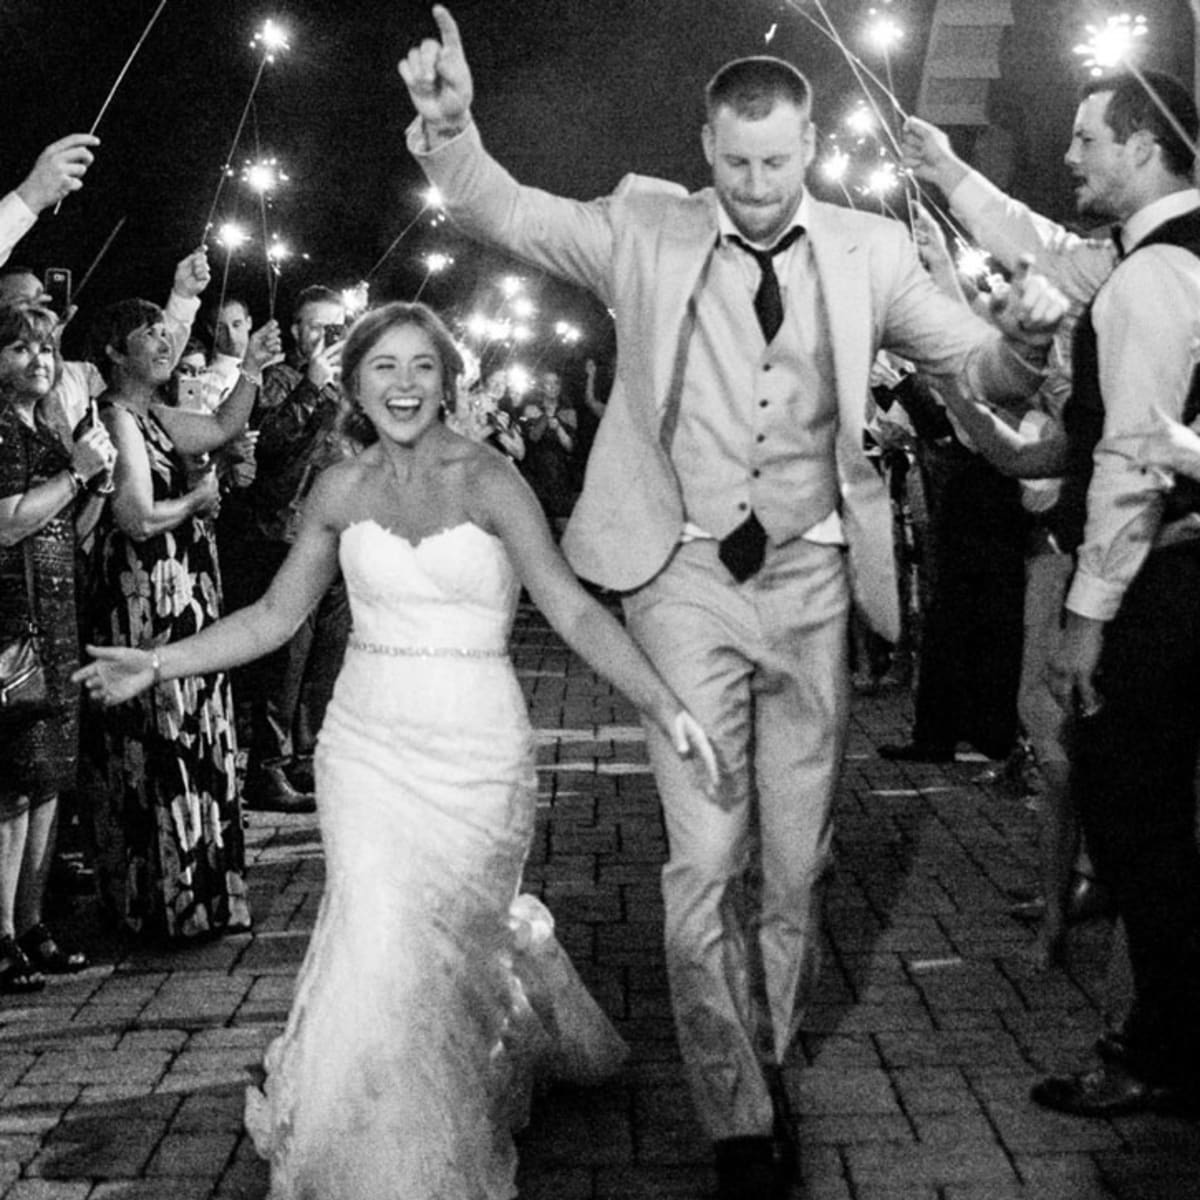 EAGLES CARSON WENTZ WEEKEND WEDDING: HERE ARE MORE PHOTOS!